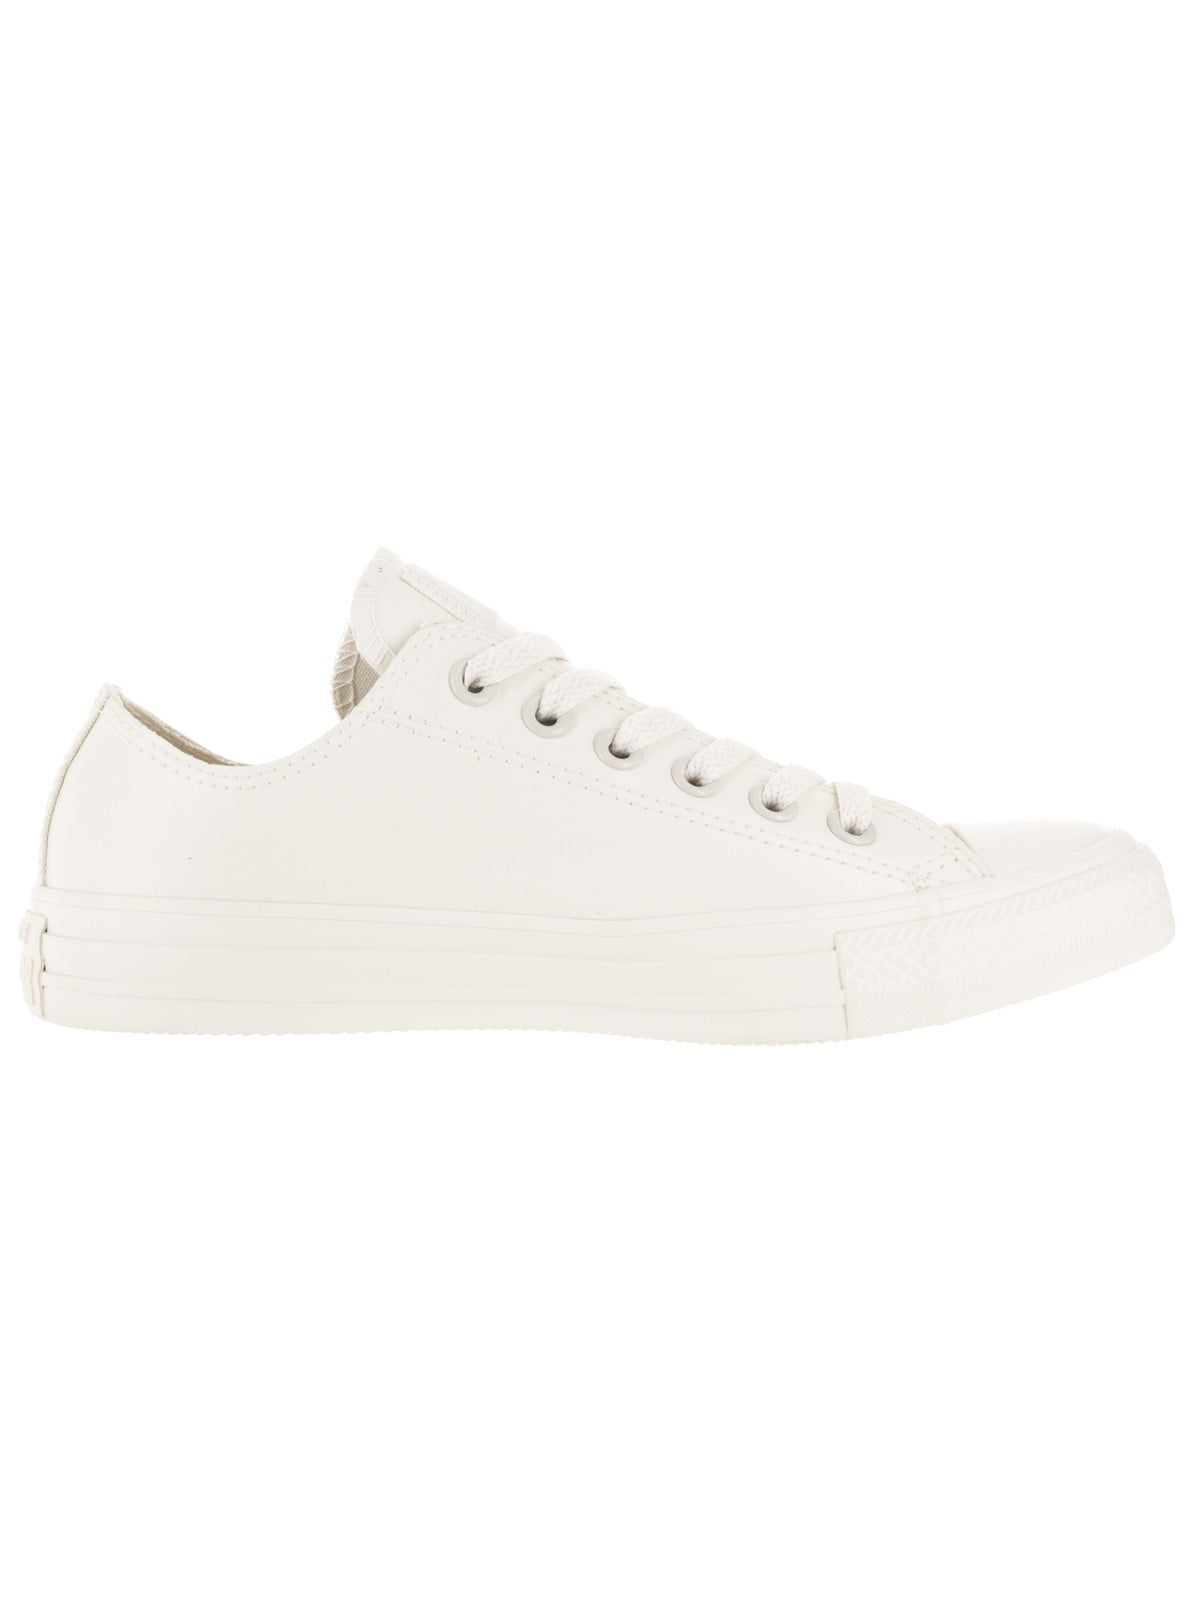 converse all star 7 ox parchment